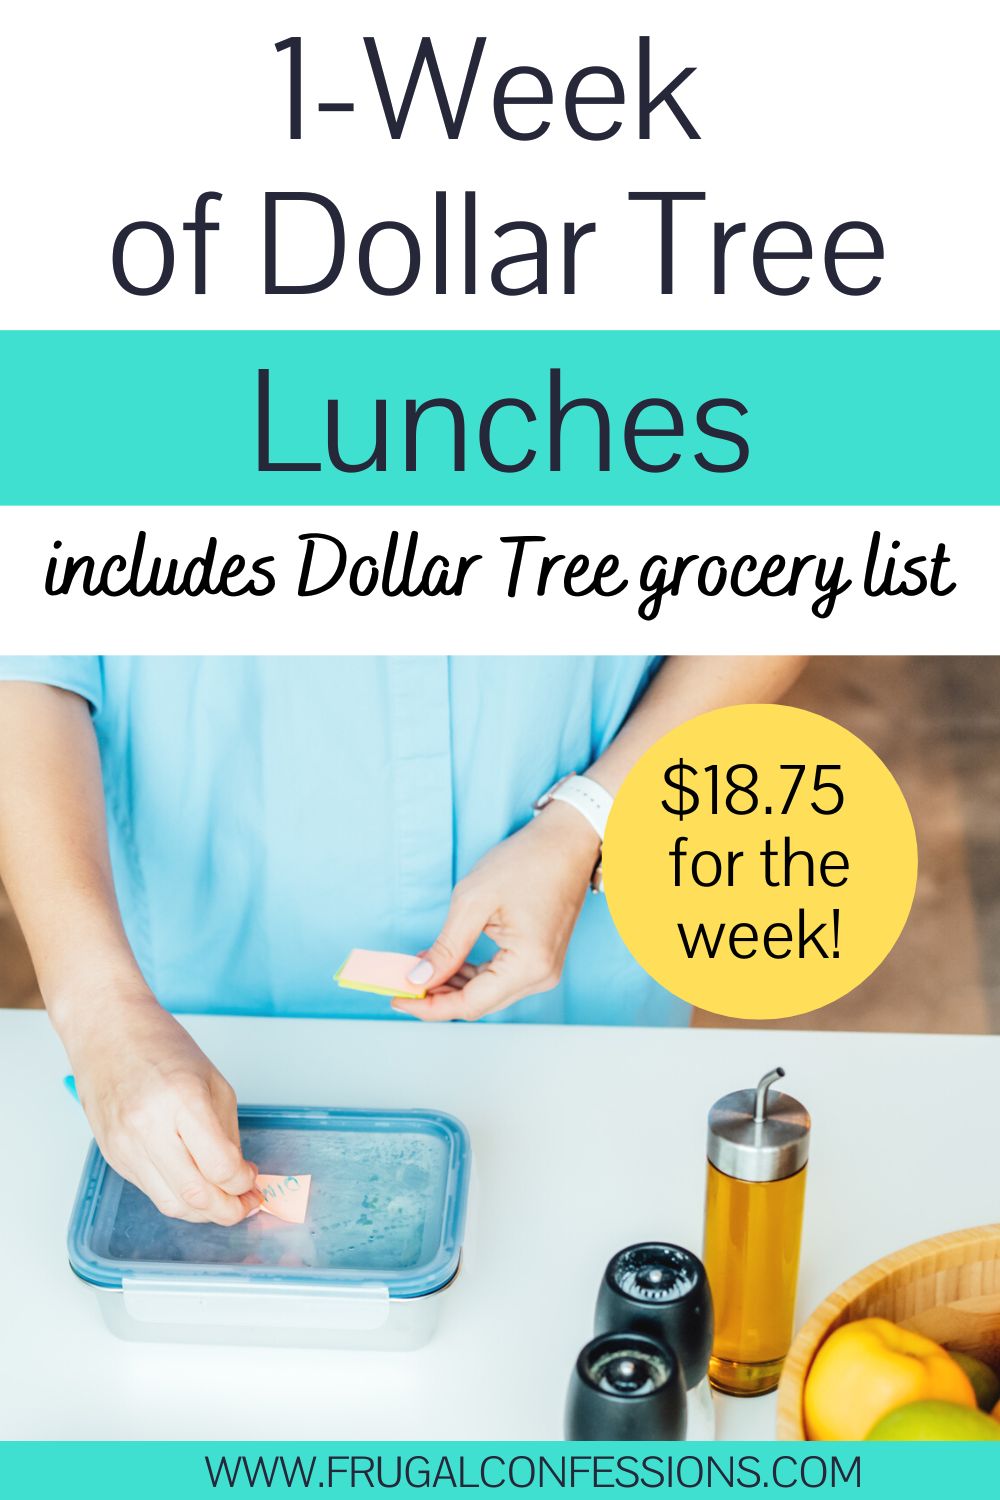 woman in blue shirt filling lunch container, text overlay "1 week of dollar tree lunches"